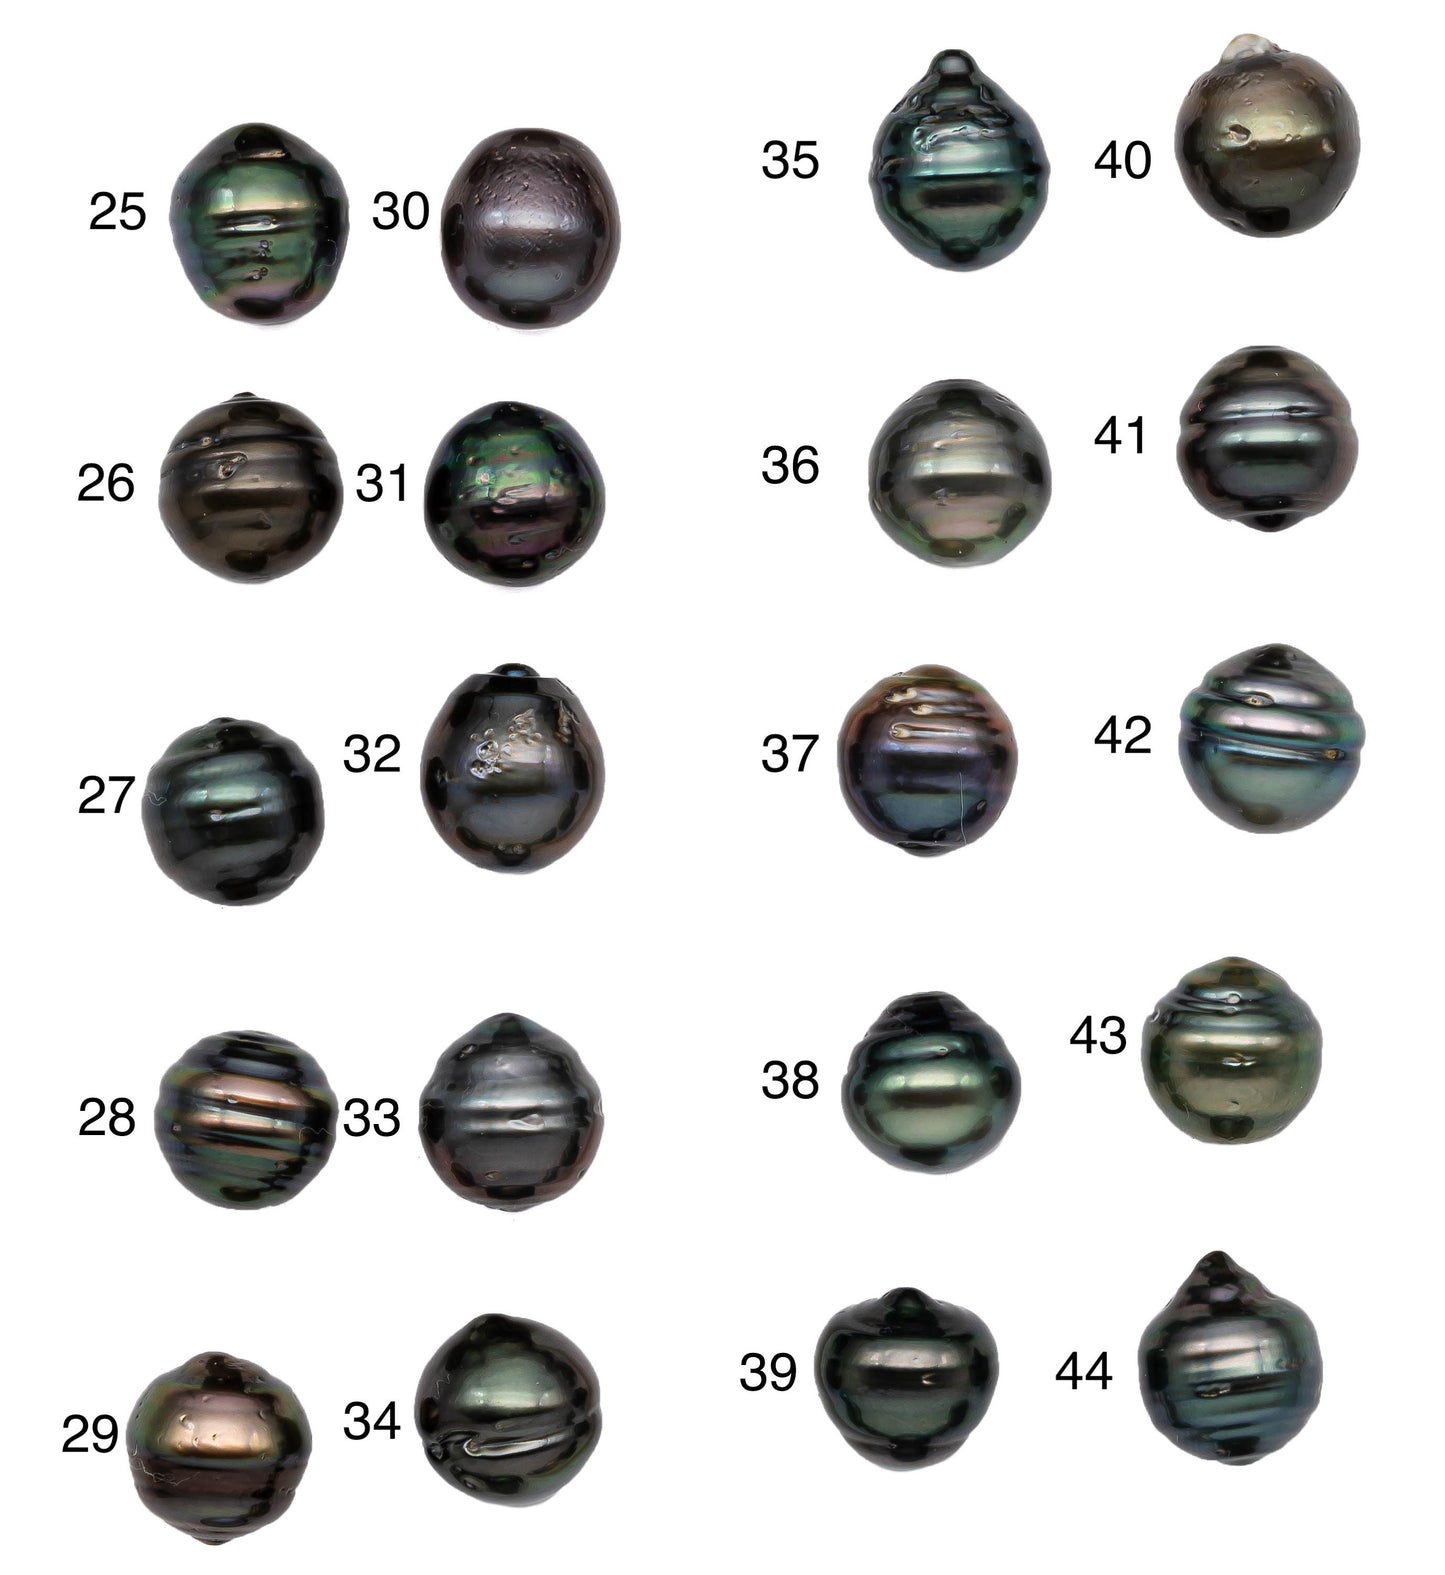 Single Tahitian Pearl Natural Color Drops with Blemishes and High Luster, One Piece Undrilled Loose Pearl in 11-11.5mm, SKU#1081TH